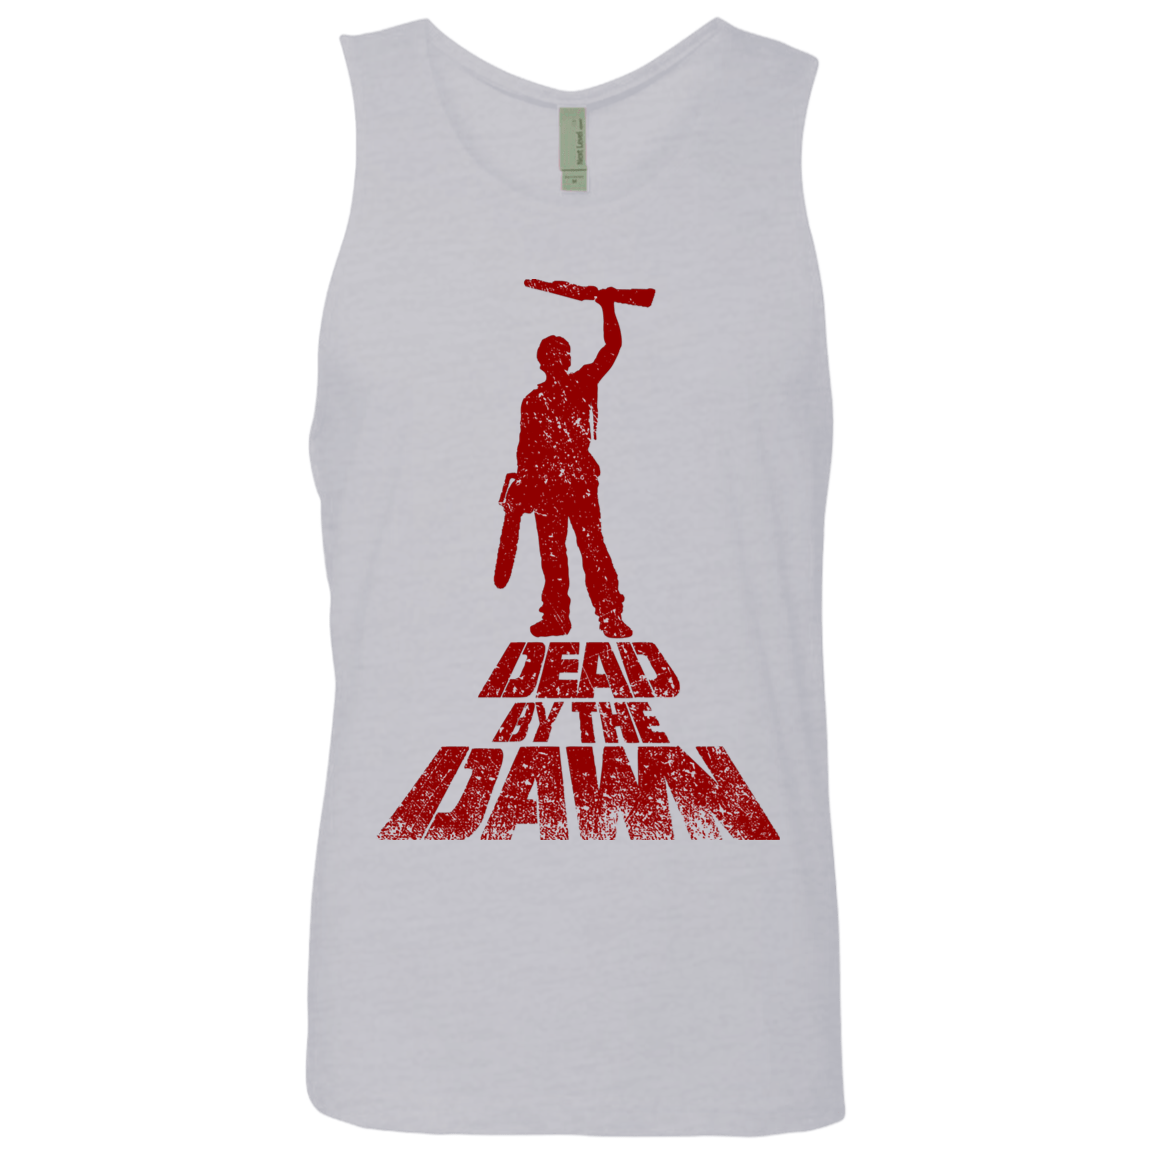 T-Shirts Heather Grey / S Dead by the Dawn Men's Premium Tank Top